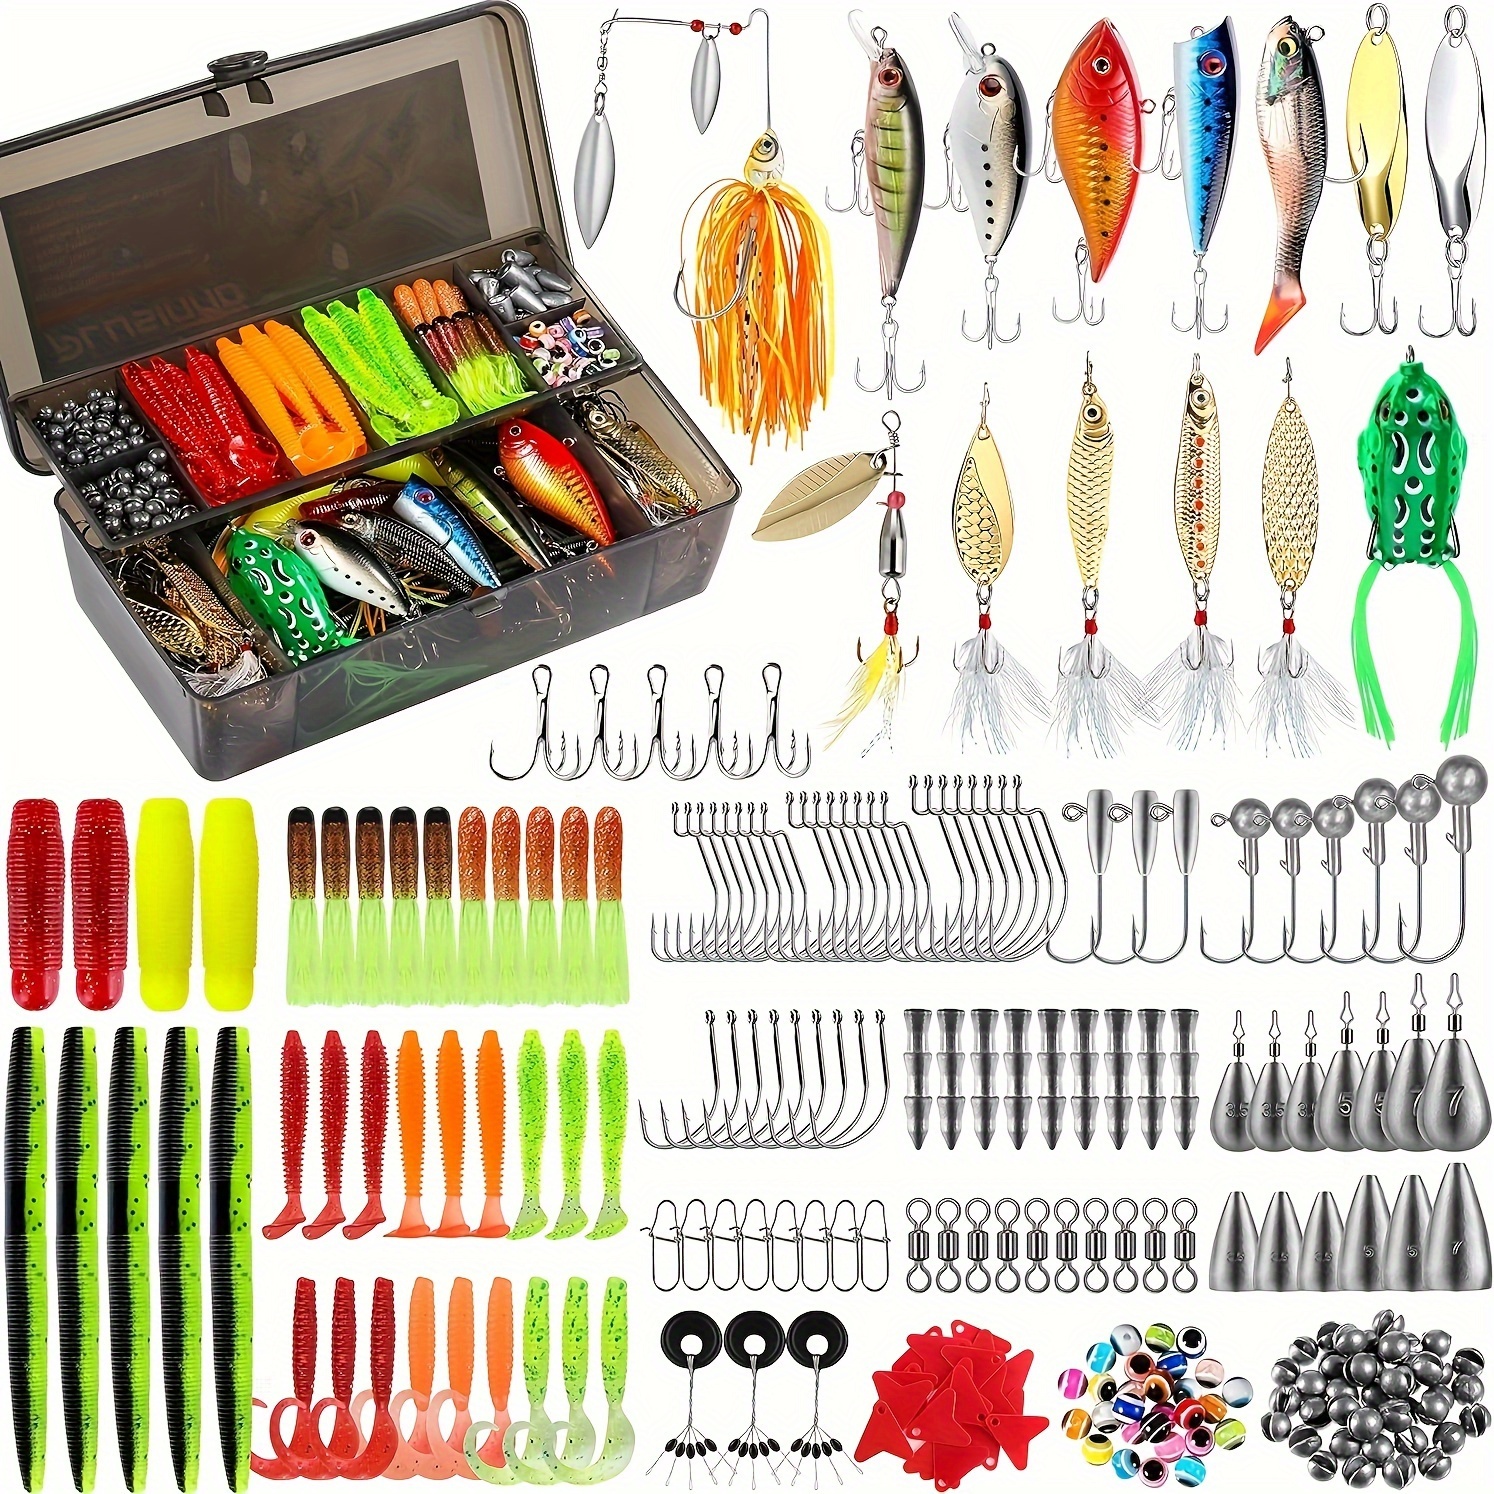 

Plusinno 292pcs Fishing Accessories Kit, Fishing Tackle Box With Tackle Included, Fishing Hooks, Fishing Weights Sinkers, Spinner Blade, Fishing Gear For Bass, Bluegill, Crappie, Fishing